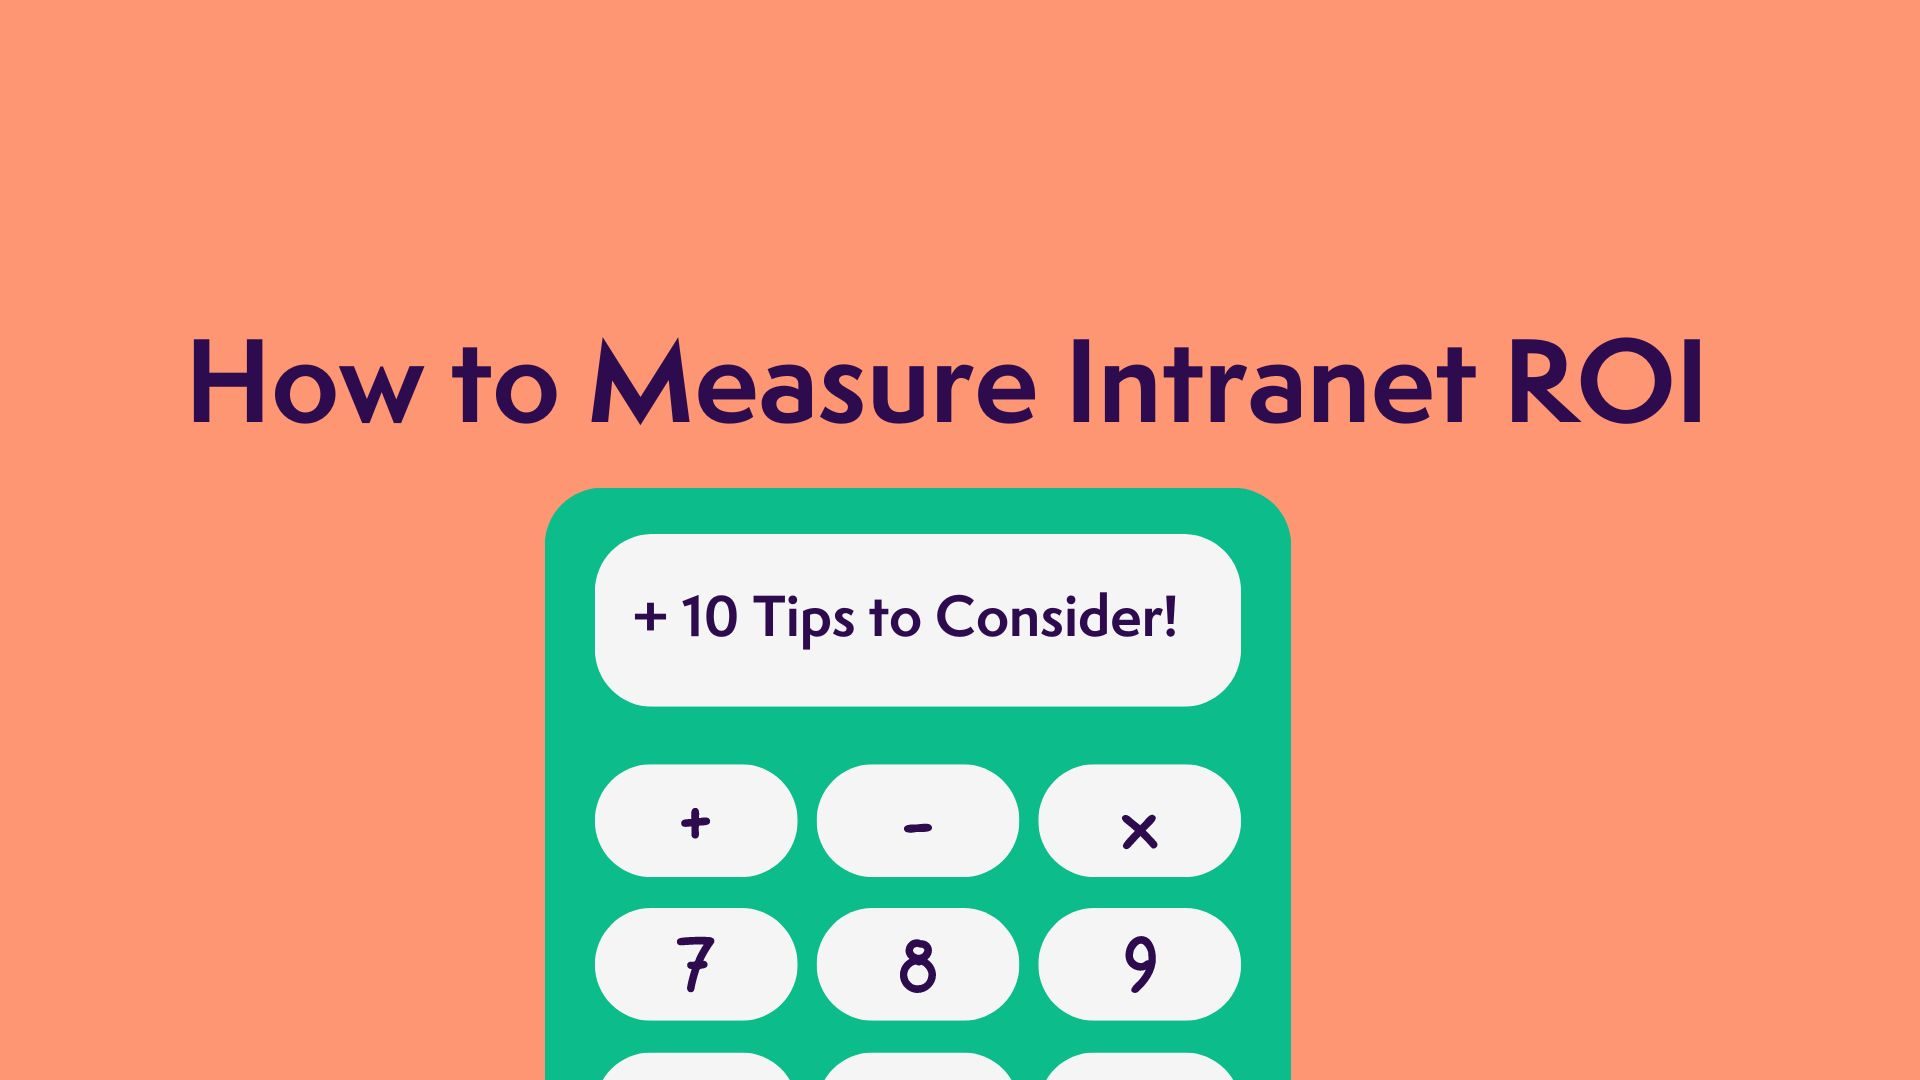 Intranet ROI: 10 Tips to Consider When Attempting to Measure it